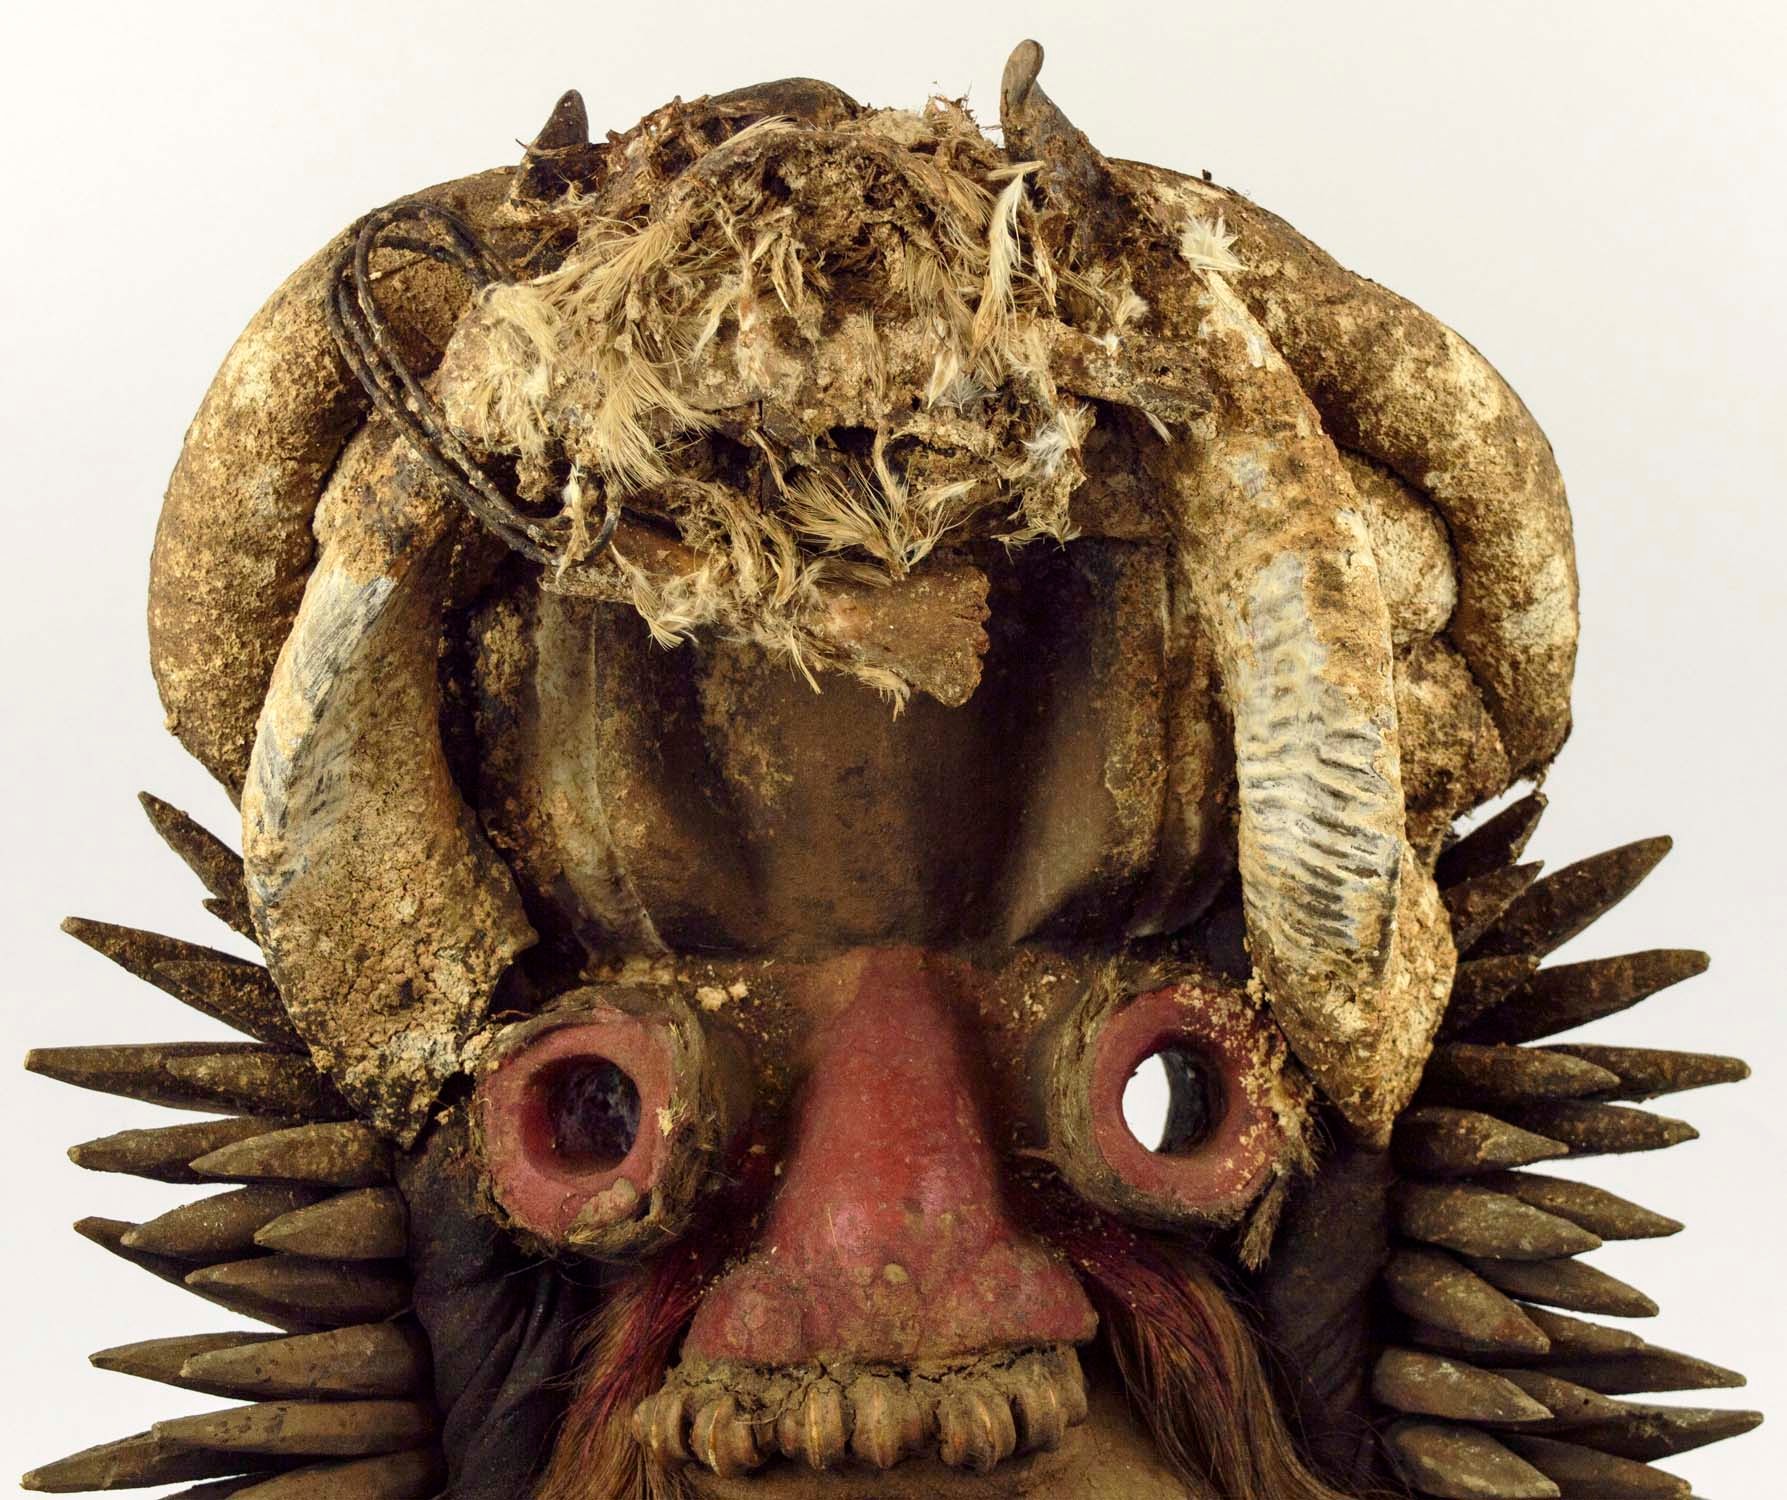 GUENE WAR MASK, Ivory Coast, 'The Ancient One', is an amalgamation of traditional style and the - Image 4 of 7